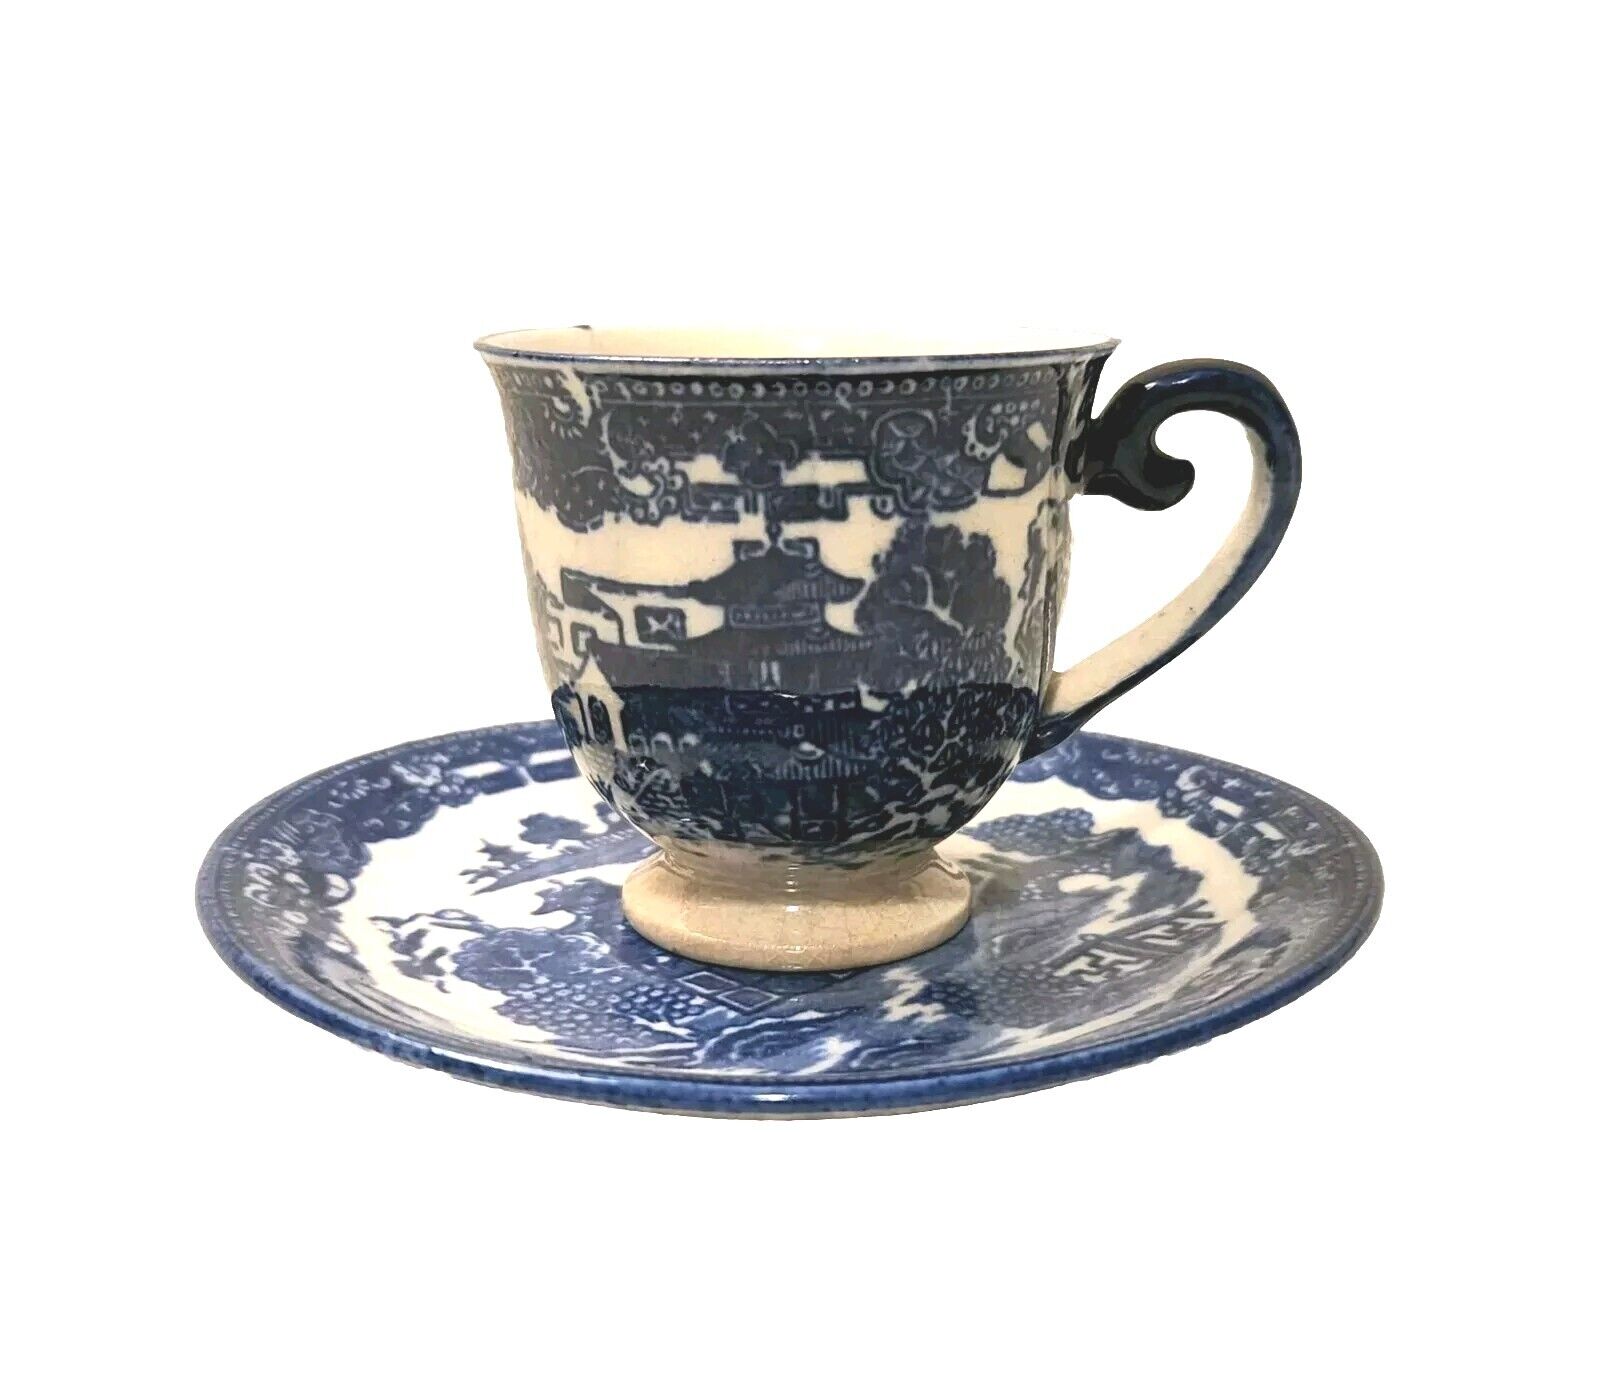 Beautiful Vintage Blue and White Demitasse Cup and Saucer, Made in Japan 1958